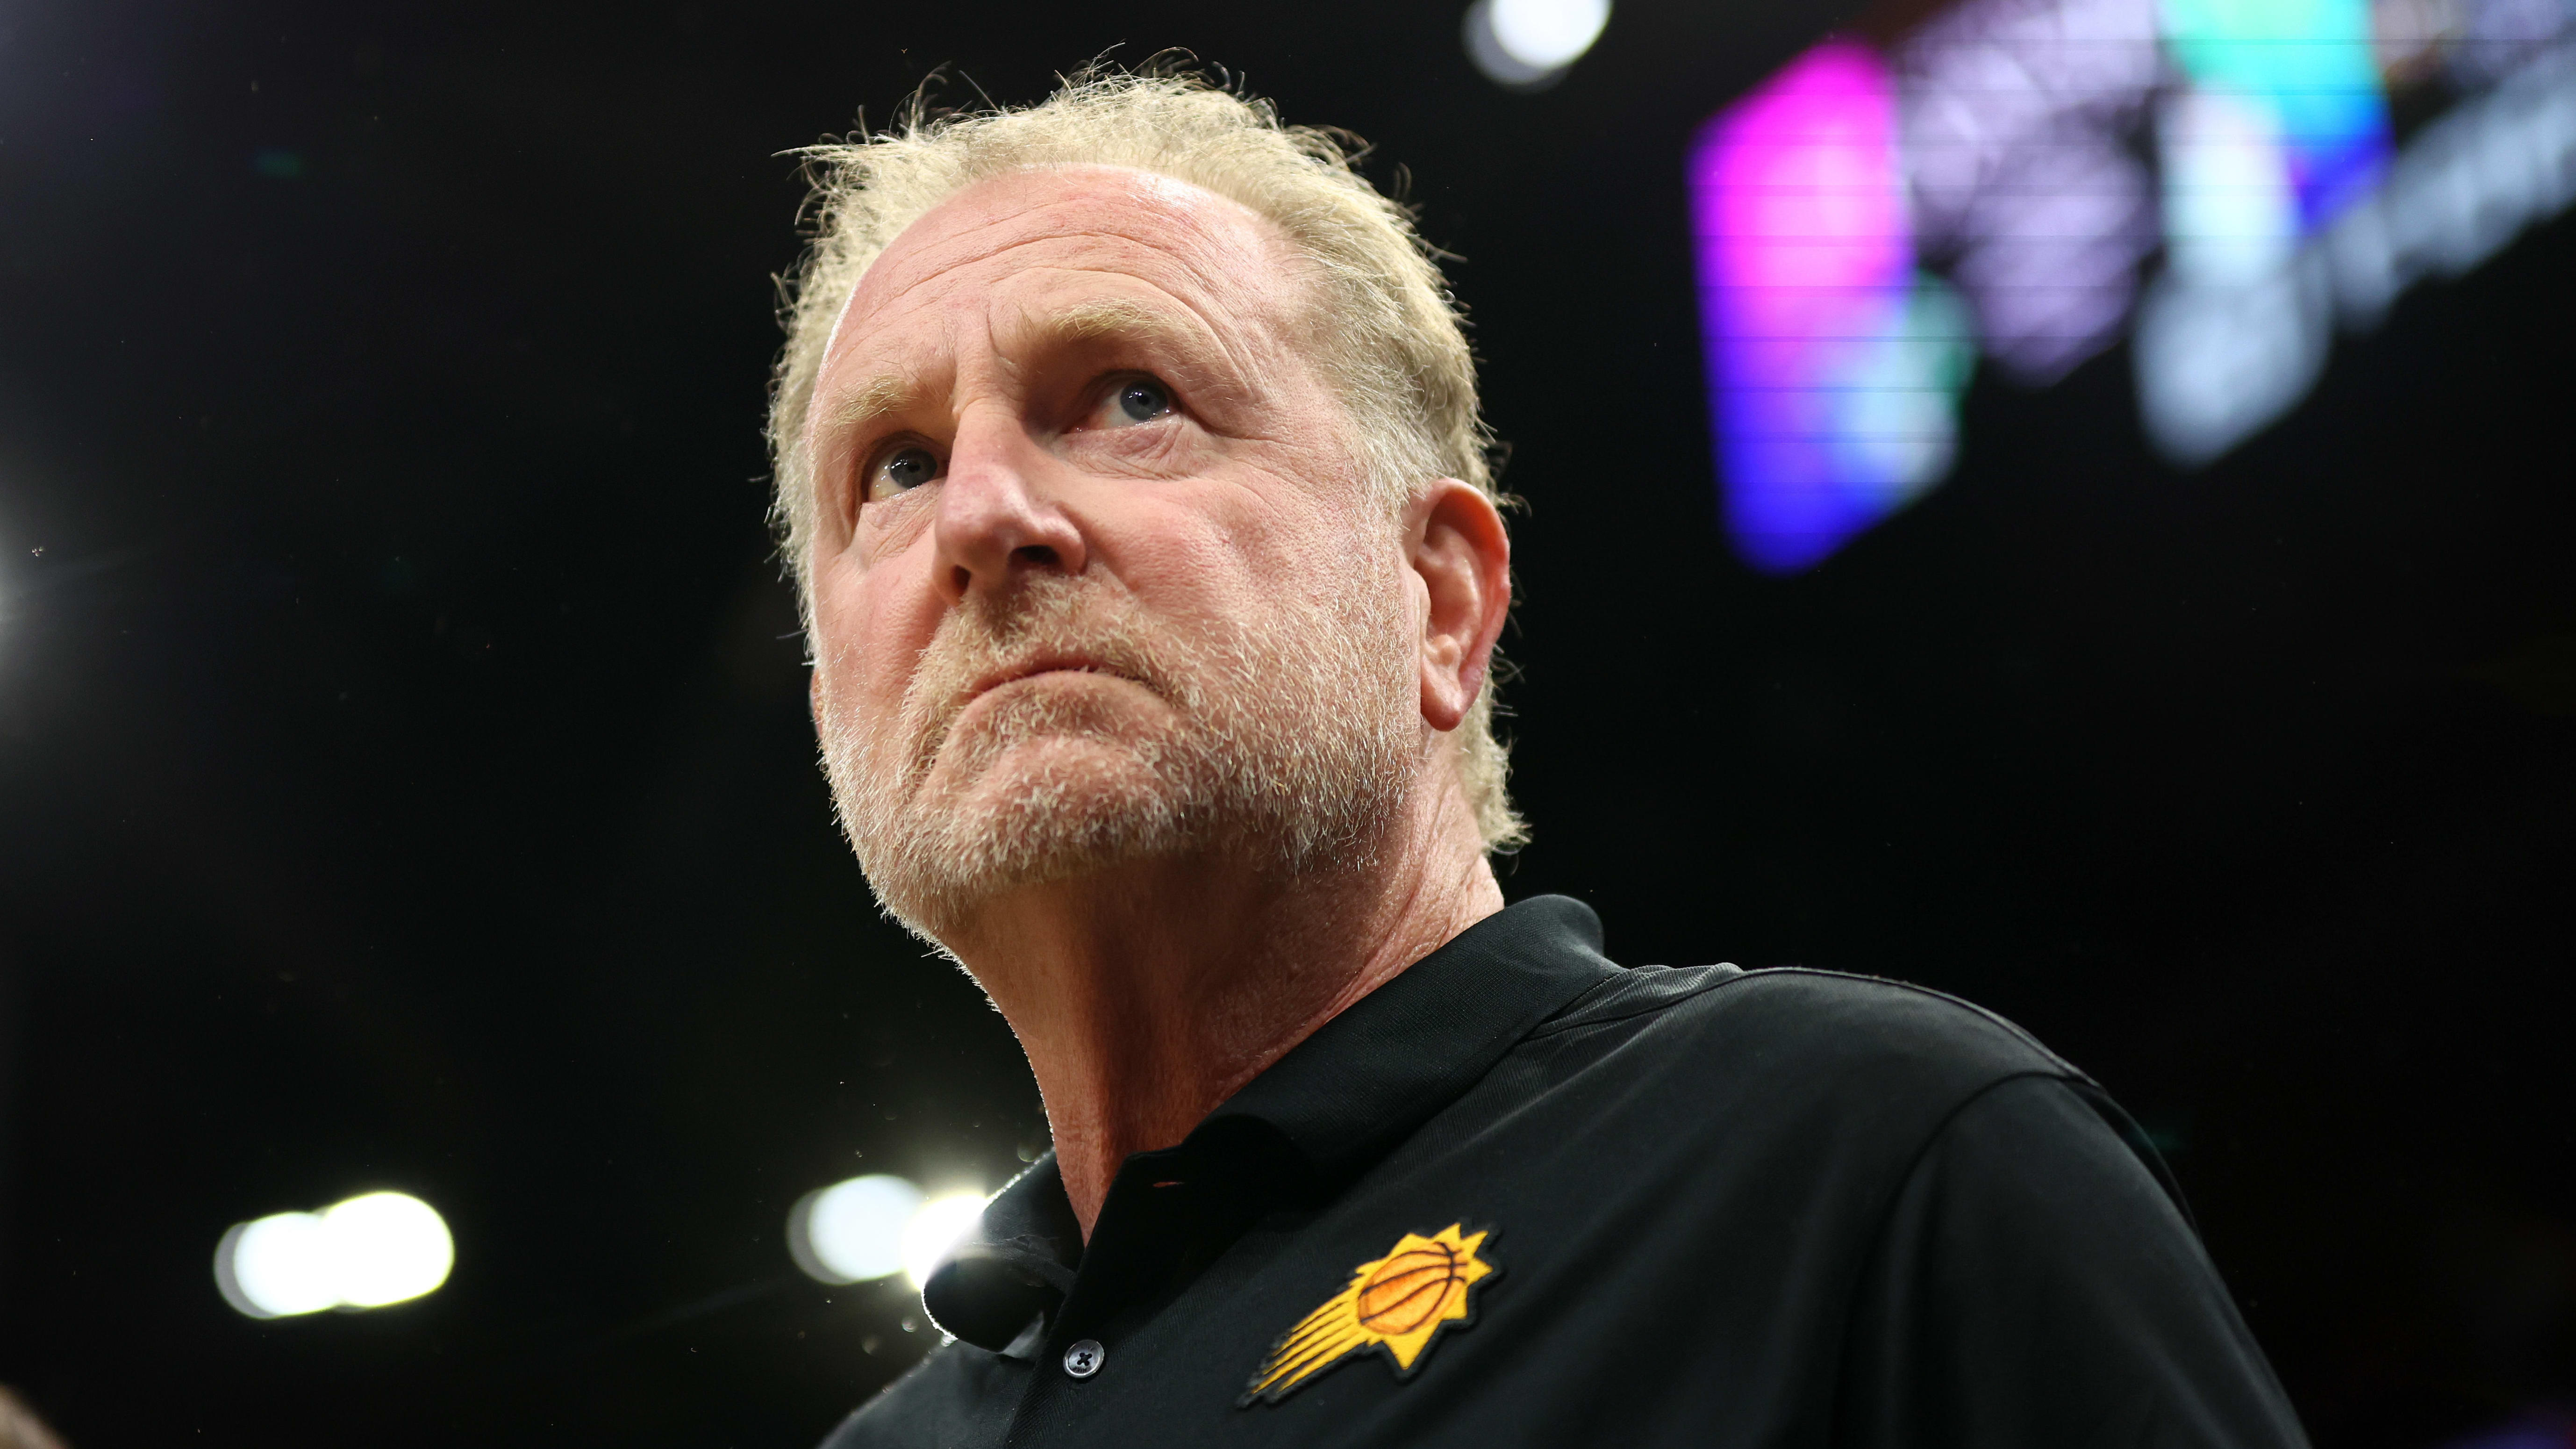 PayPal will not renew Suns jersey sponsorship deal if Sarver still involved  - NBC Sports